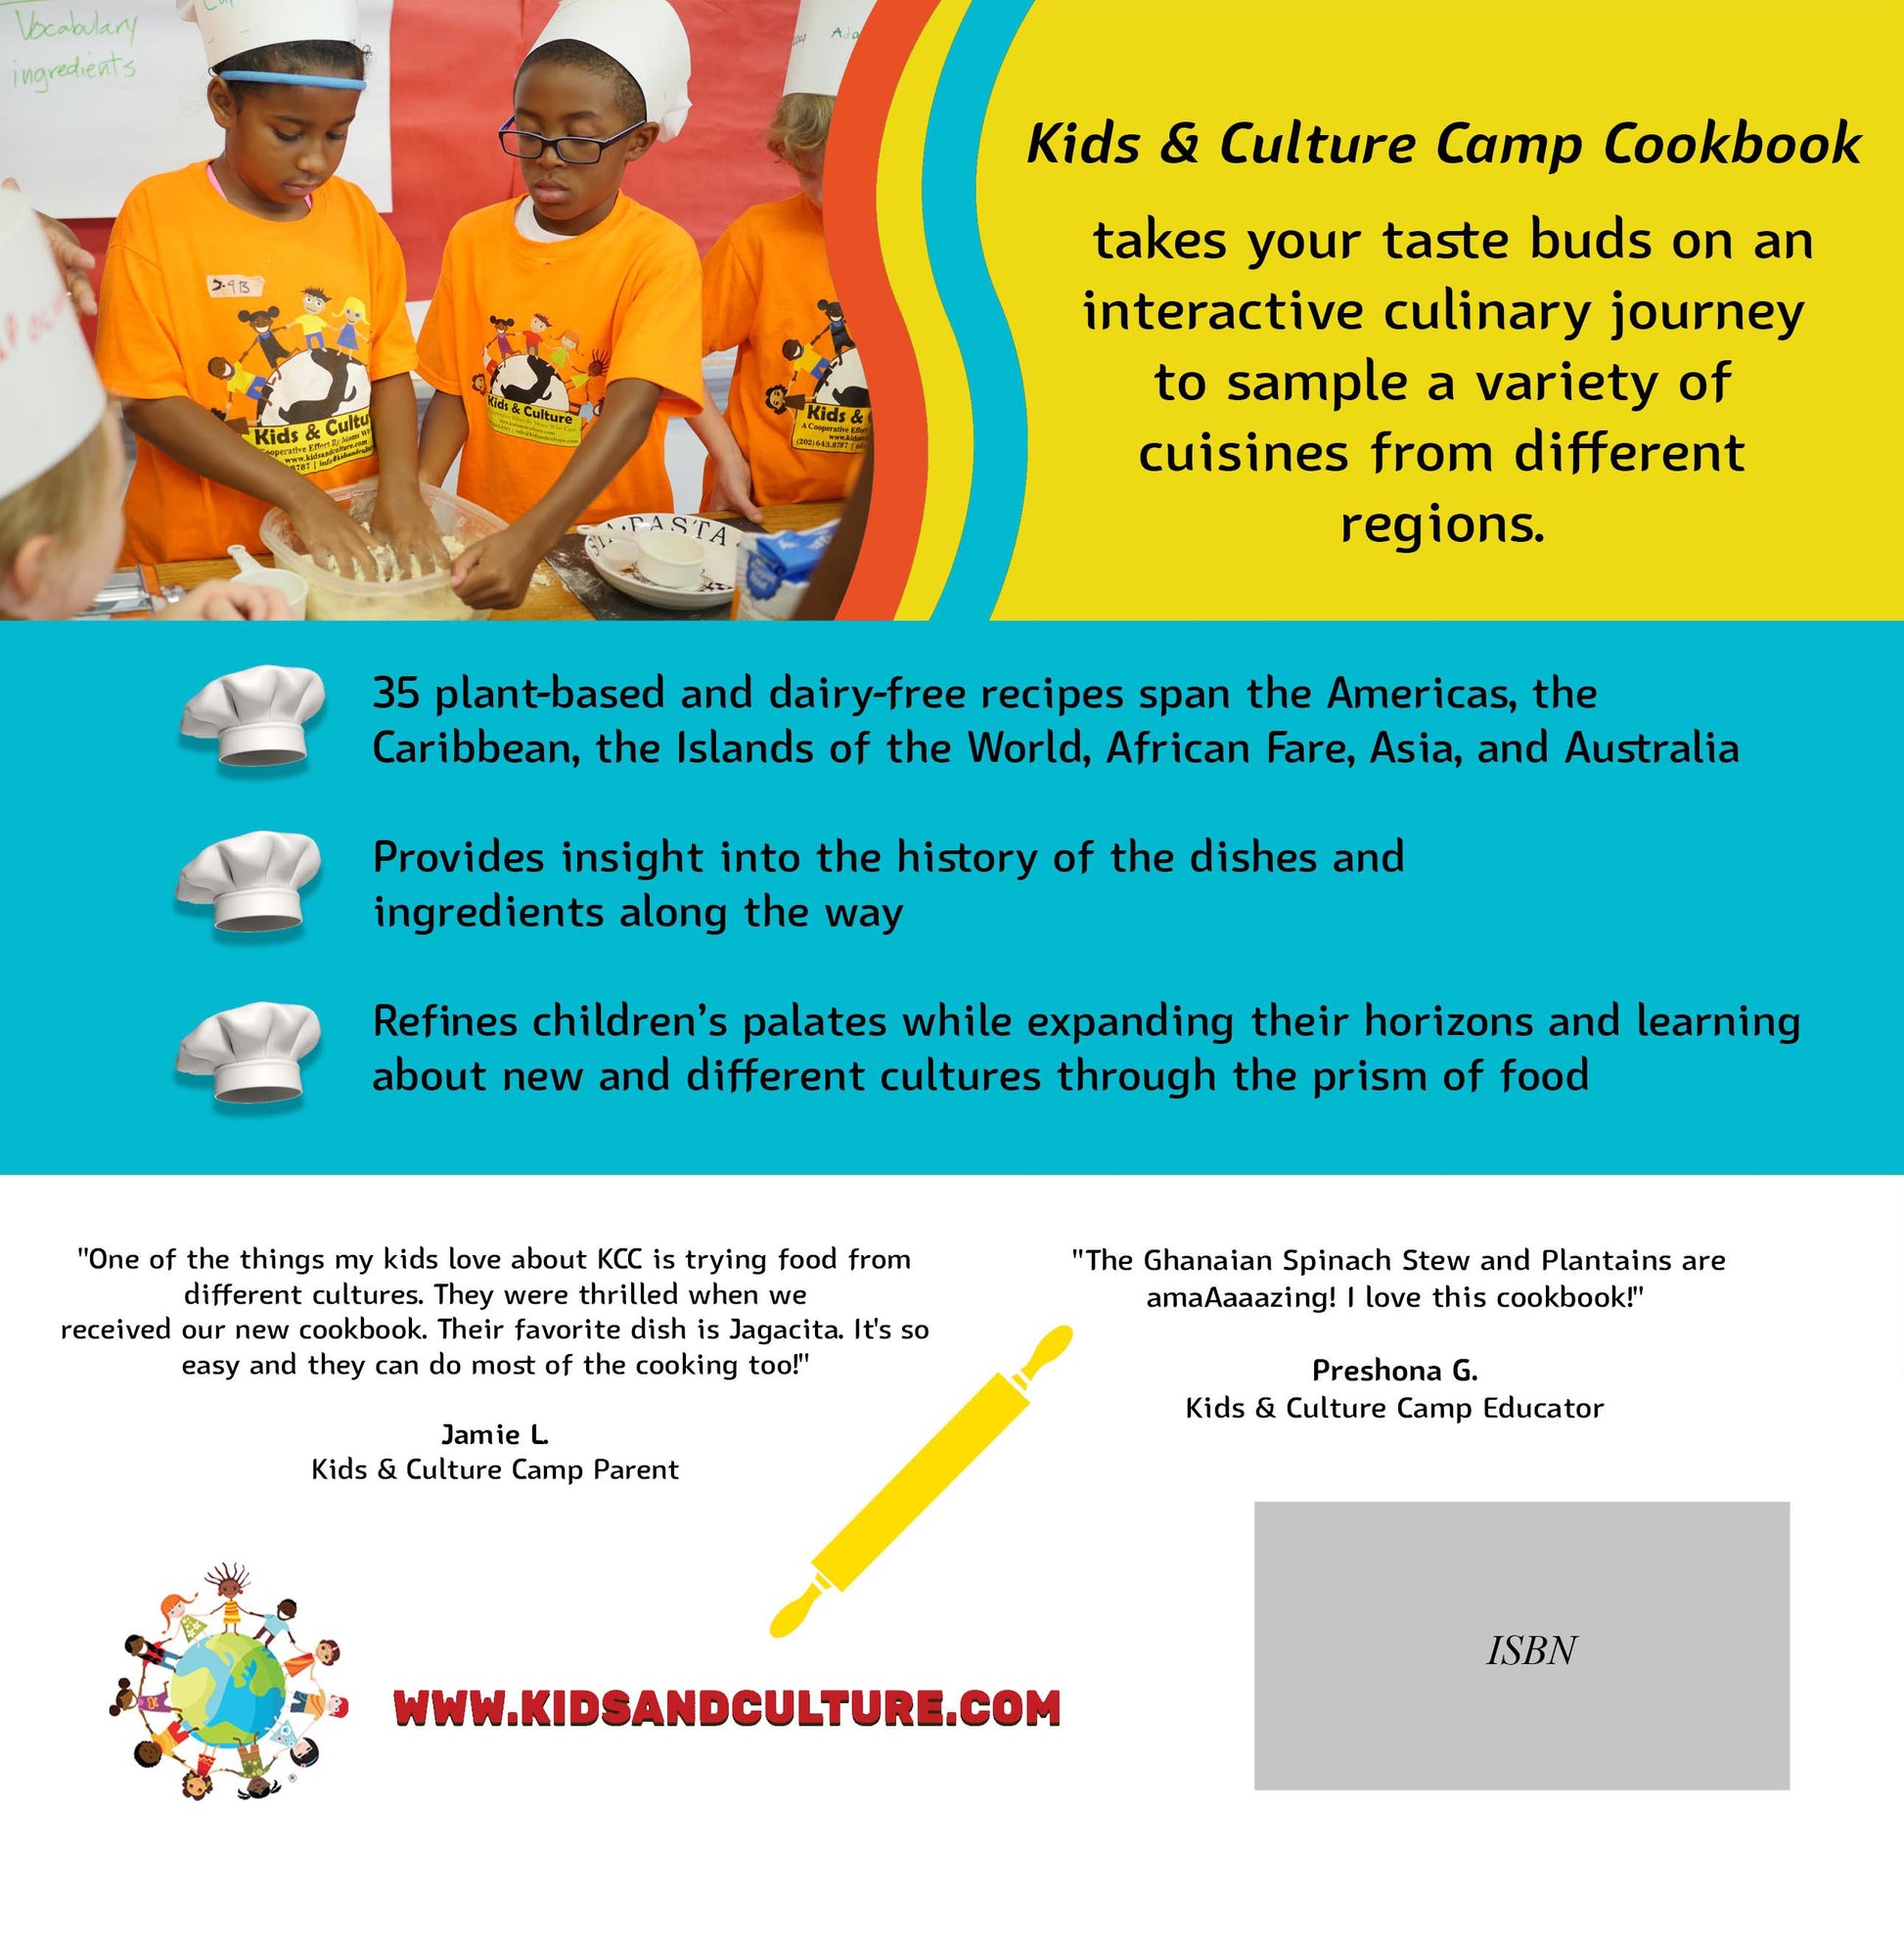 Picture of students in orange KCC camp shirts with chef hats making a dish. Two testimonials from  readers of the cookbook are listed along with a brief description of the books's highlights. The bottom of the page includes the website, www.kidsandculture.com.